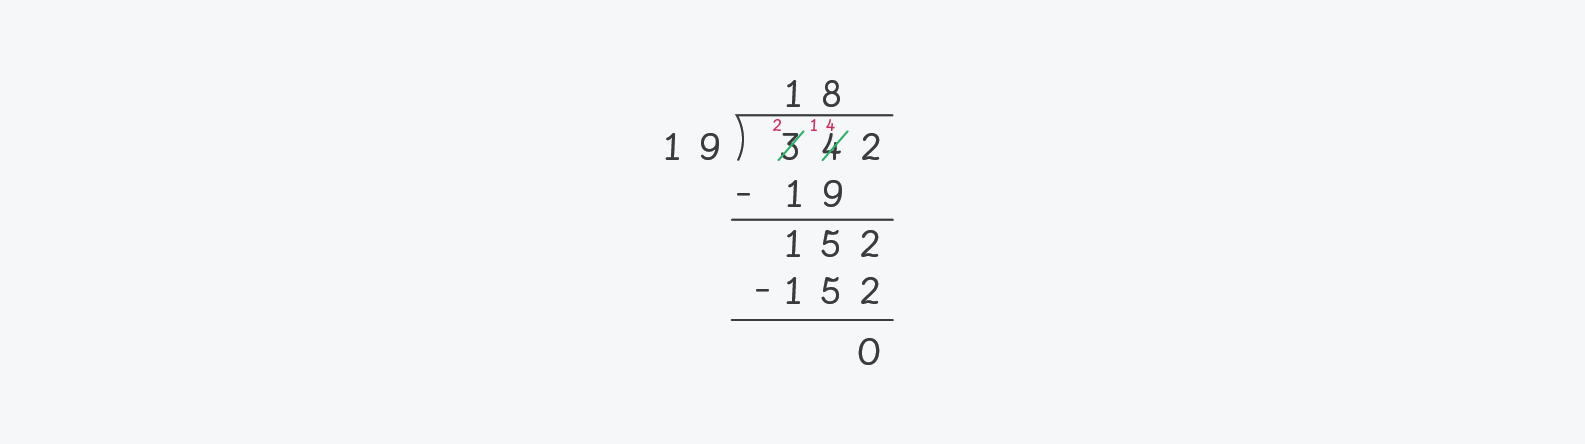 long division of 342 divided by 19 to solve complex maths word problem